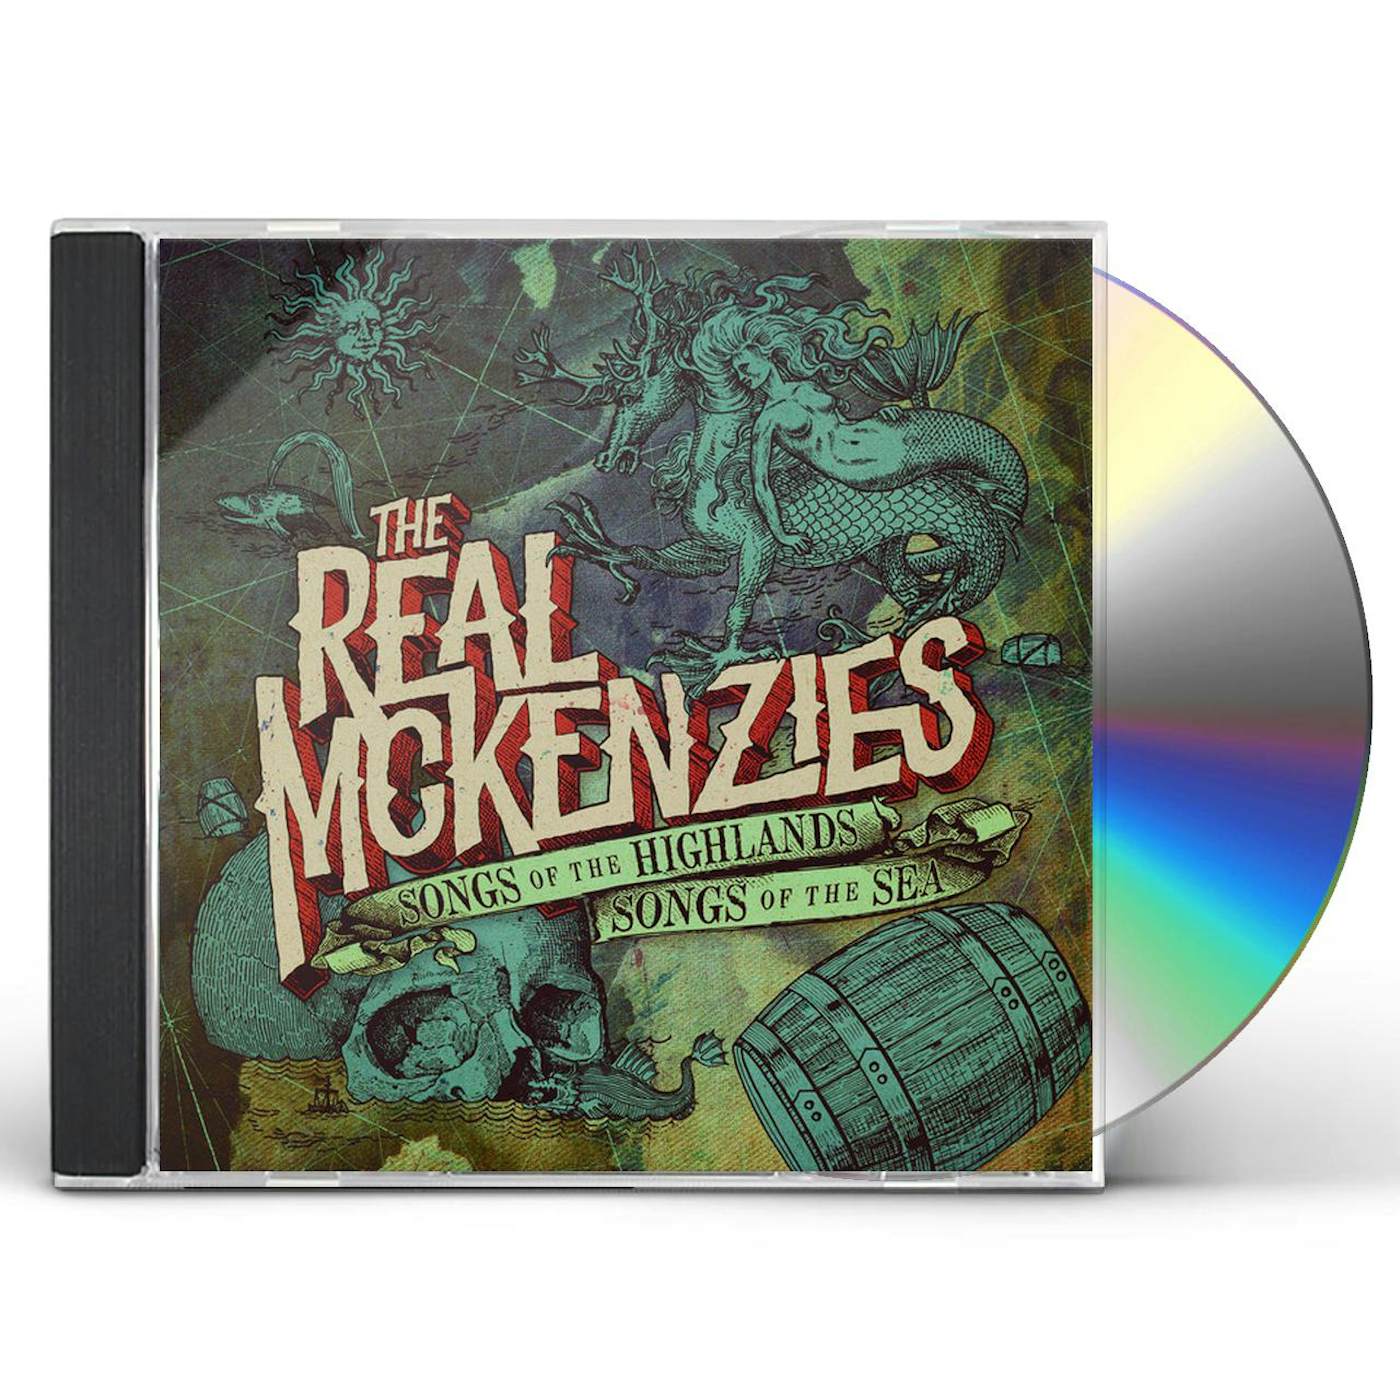 The Real McKenzies Songs Of The Highlands, Songs Of The Sea CD